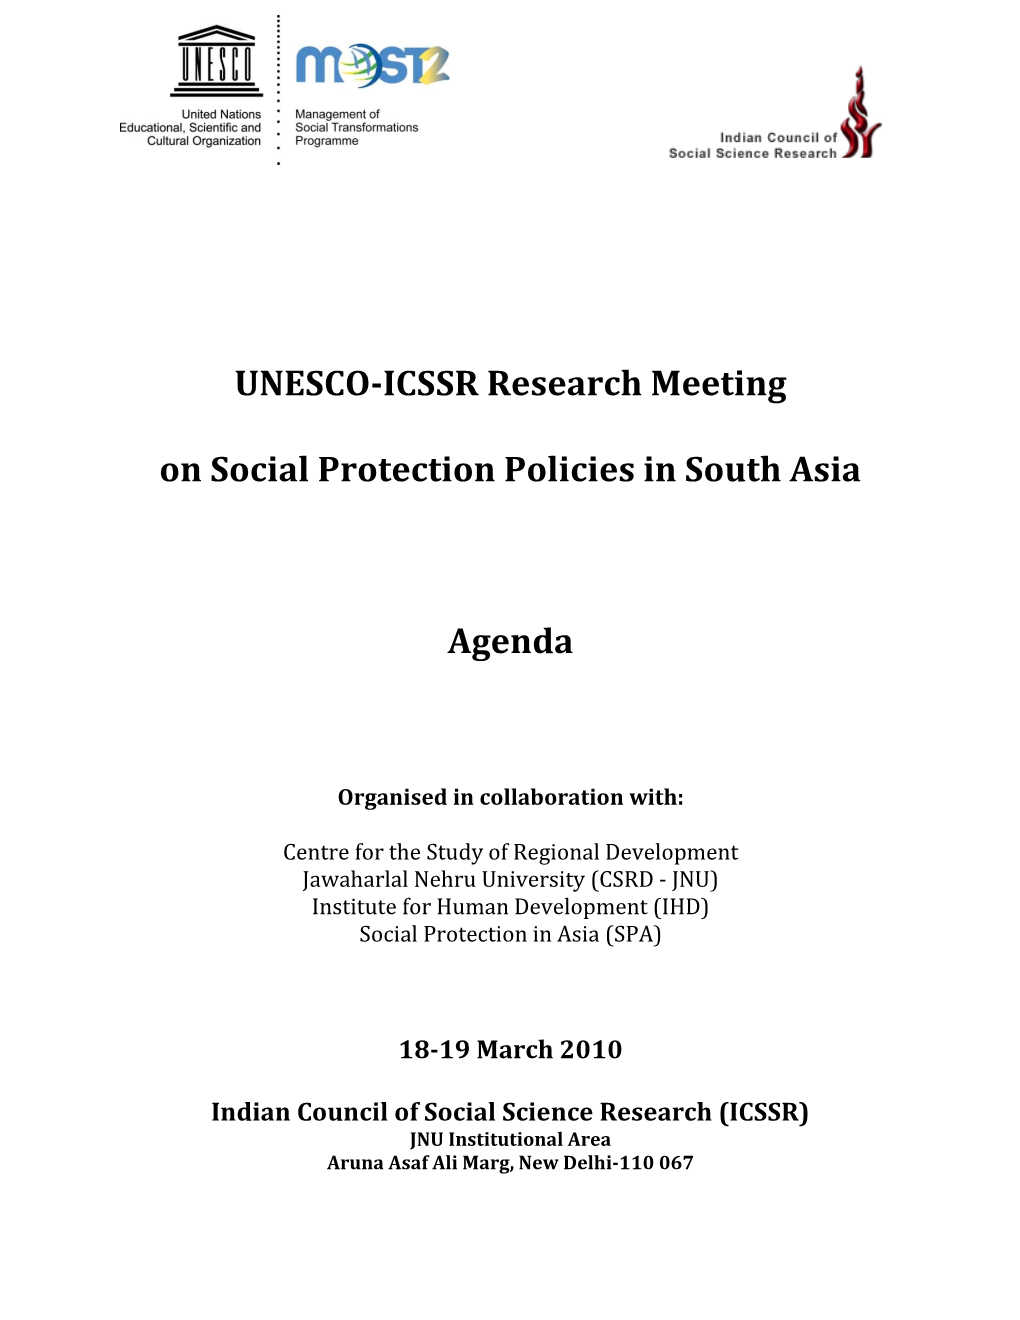 ICSSR Research Meeting on Social Protection Policies in South Asia